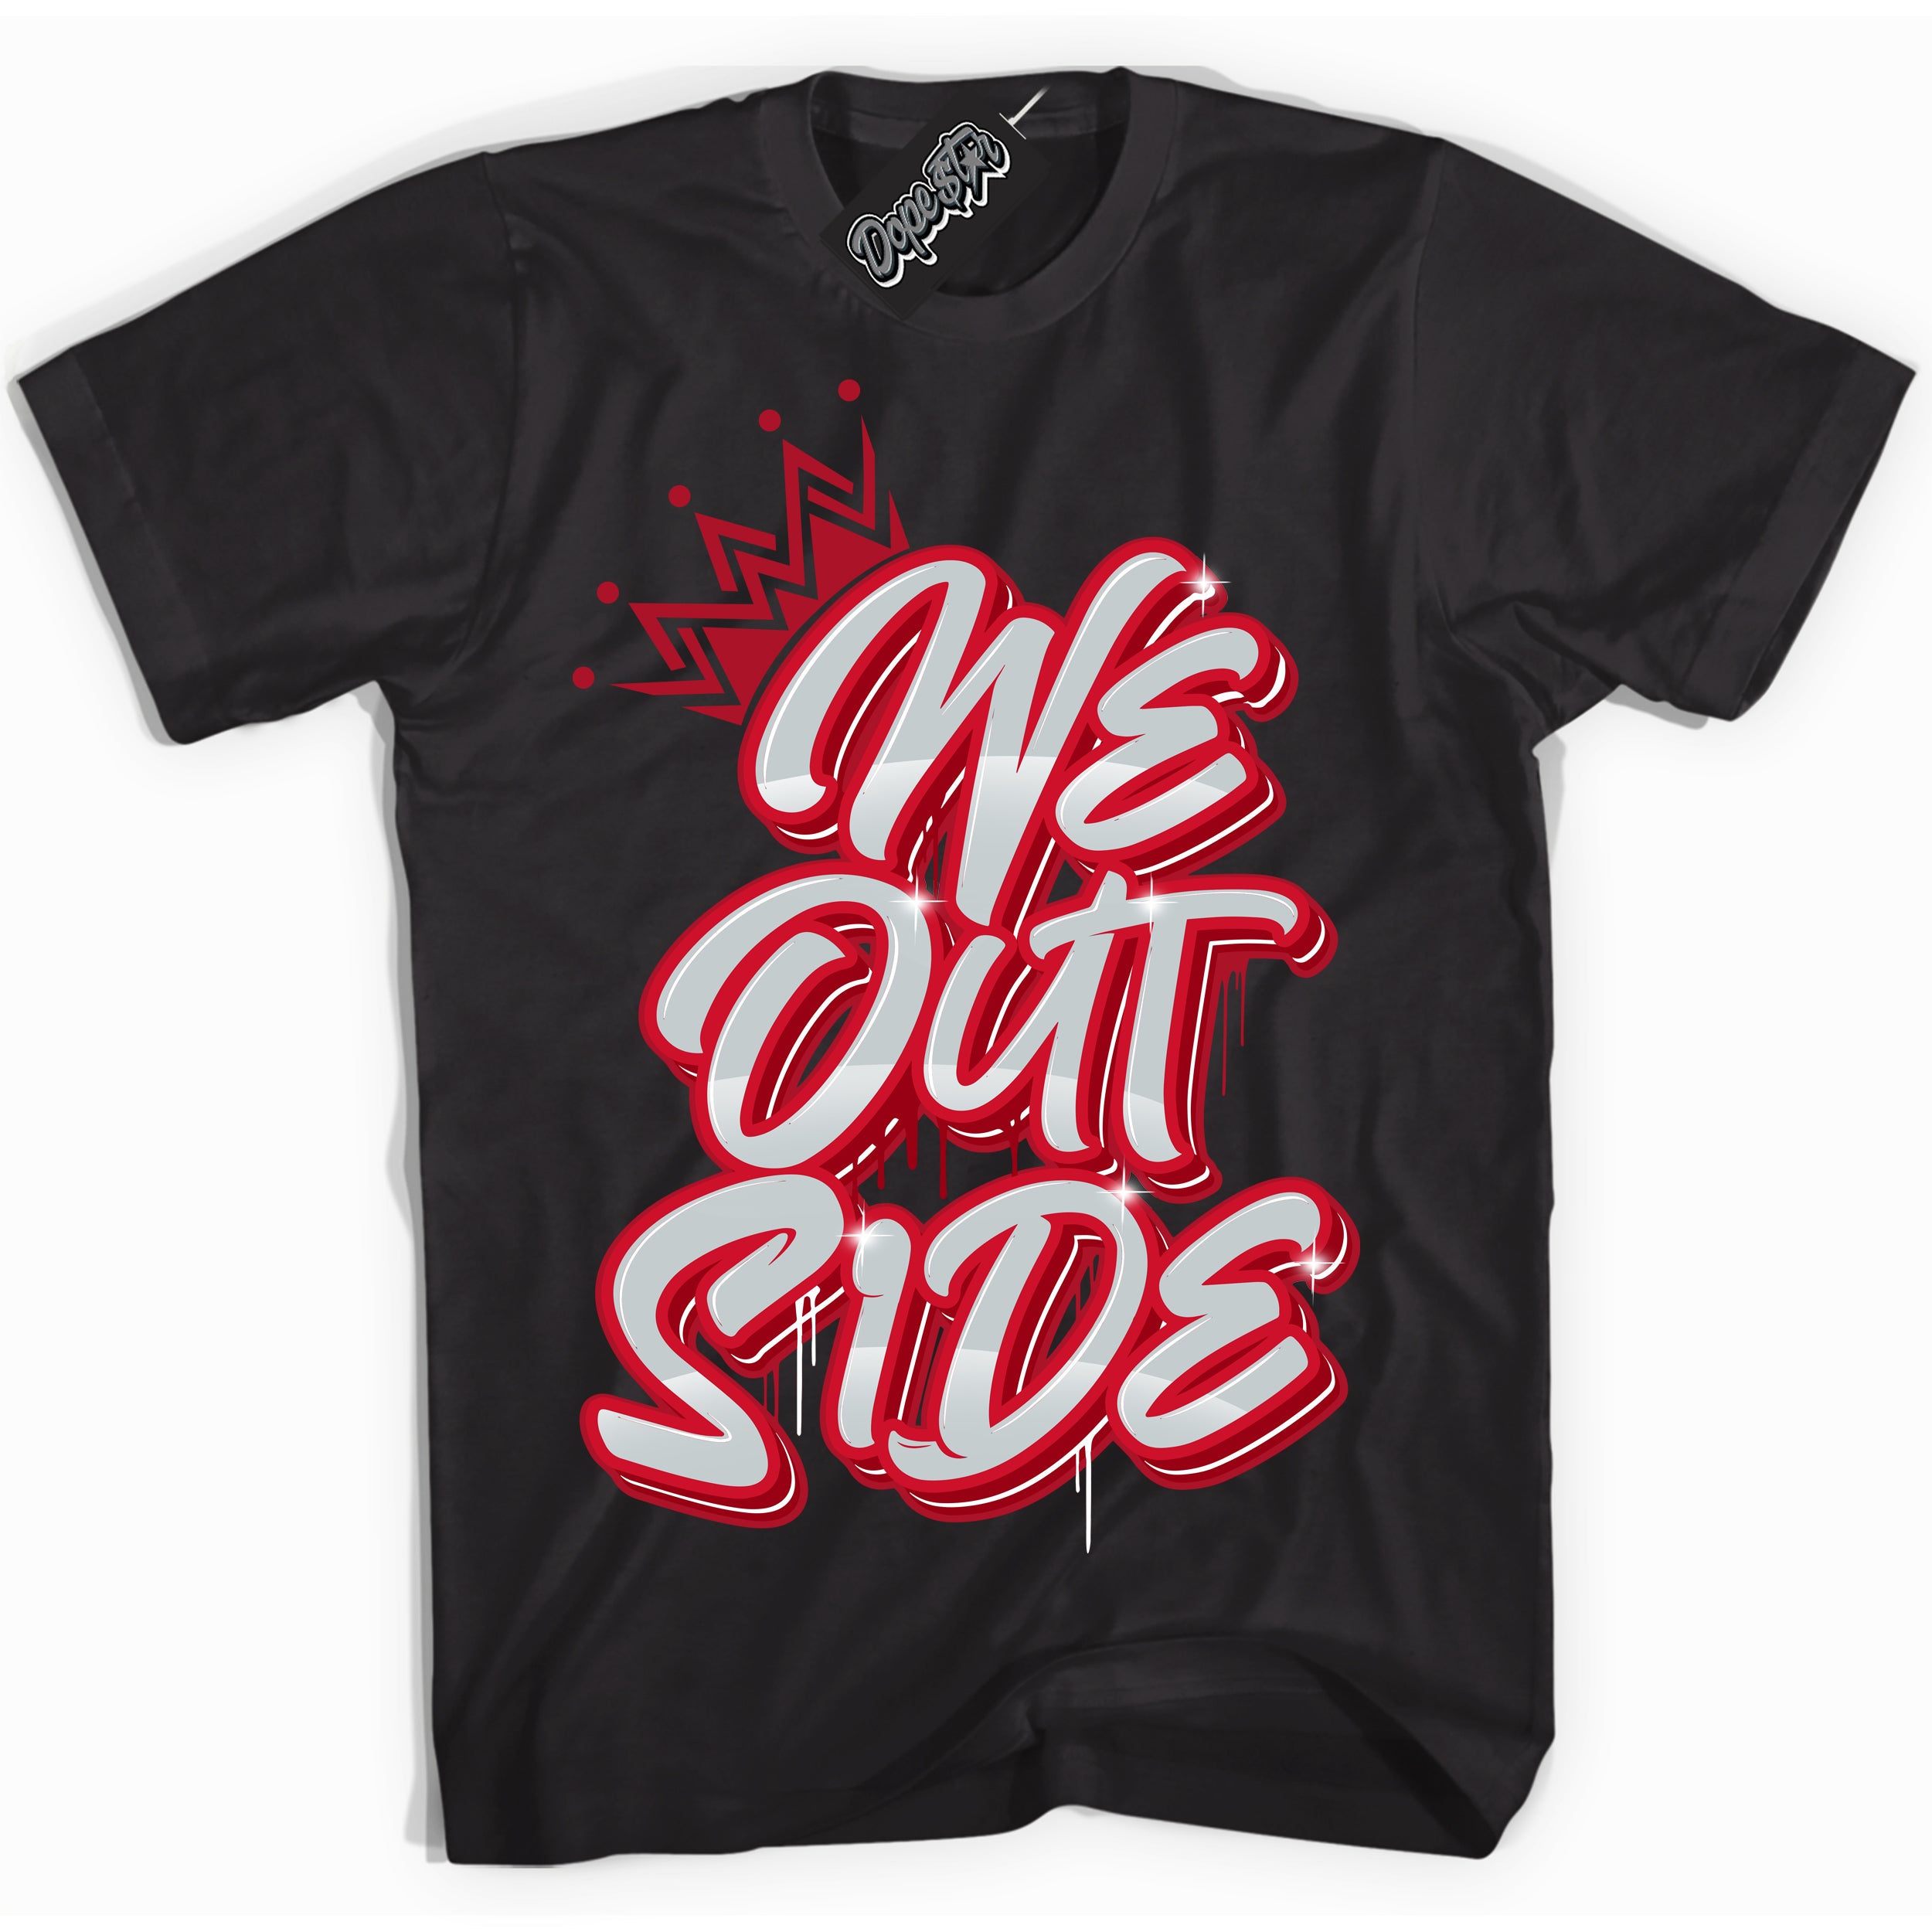 Cool Black Shirt with “ We Outside ” design that perfectly matches Reverse Ultraman Sneakers.